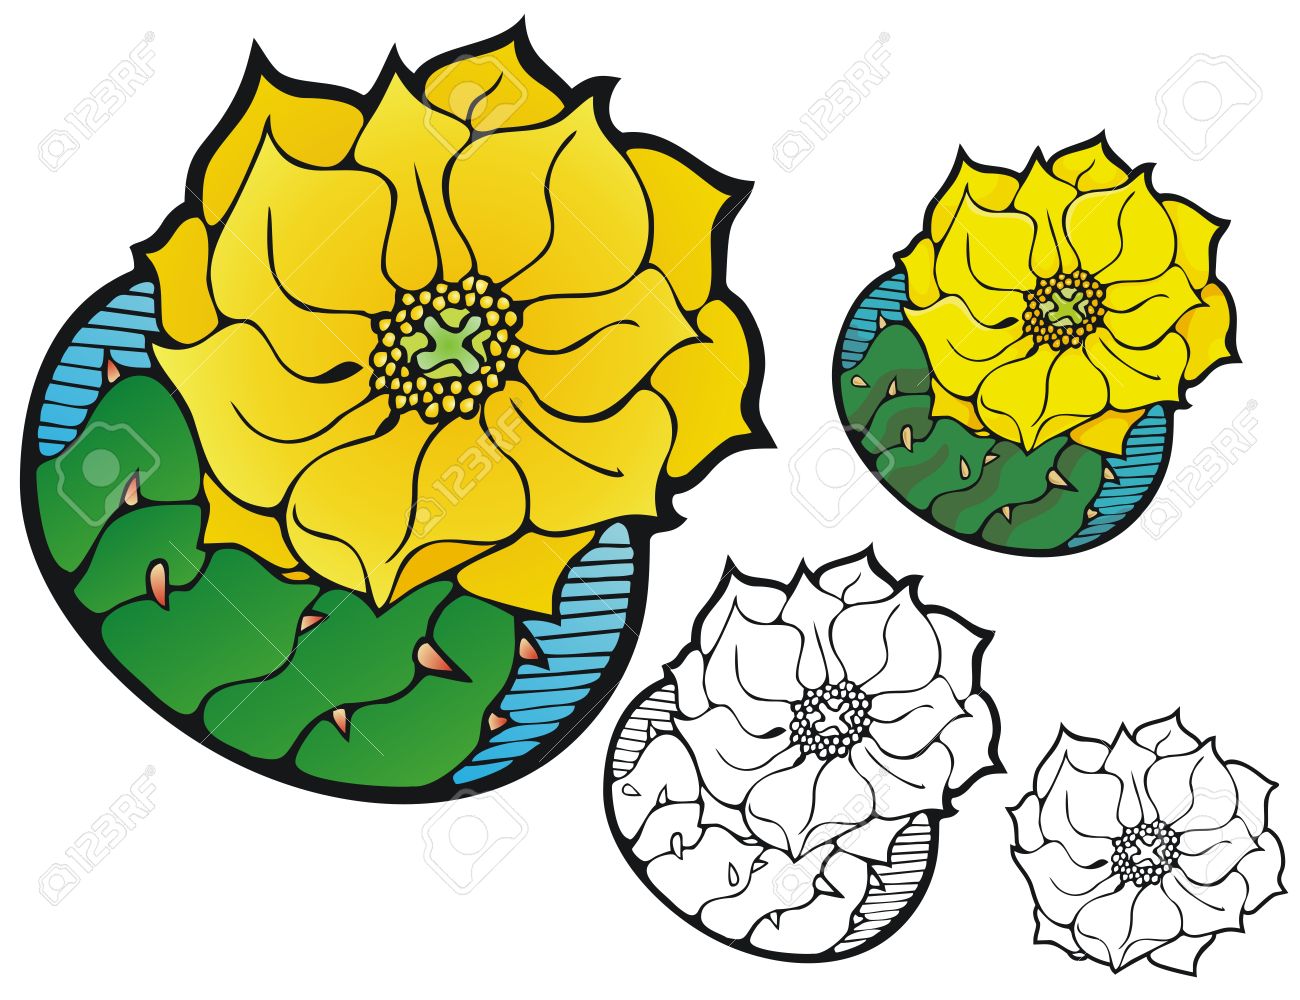 Cactus Blossom clipart #10, Download drawings